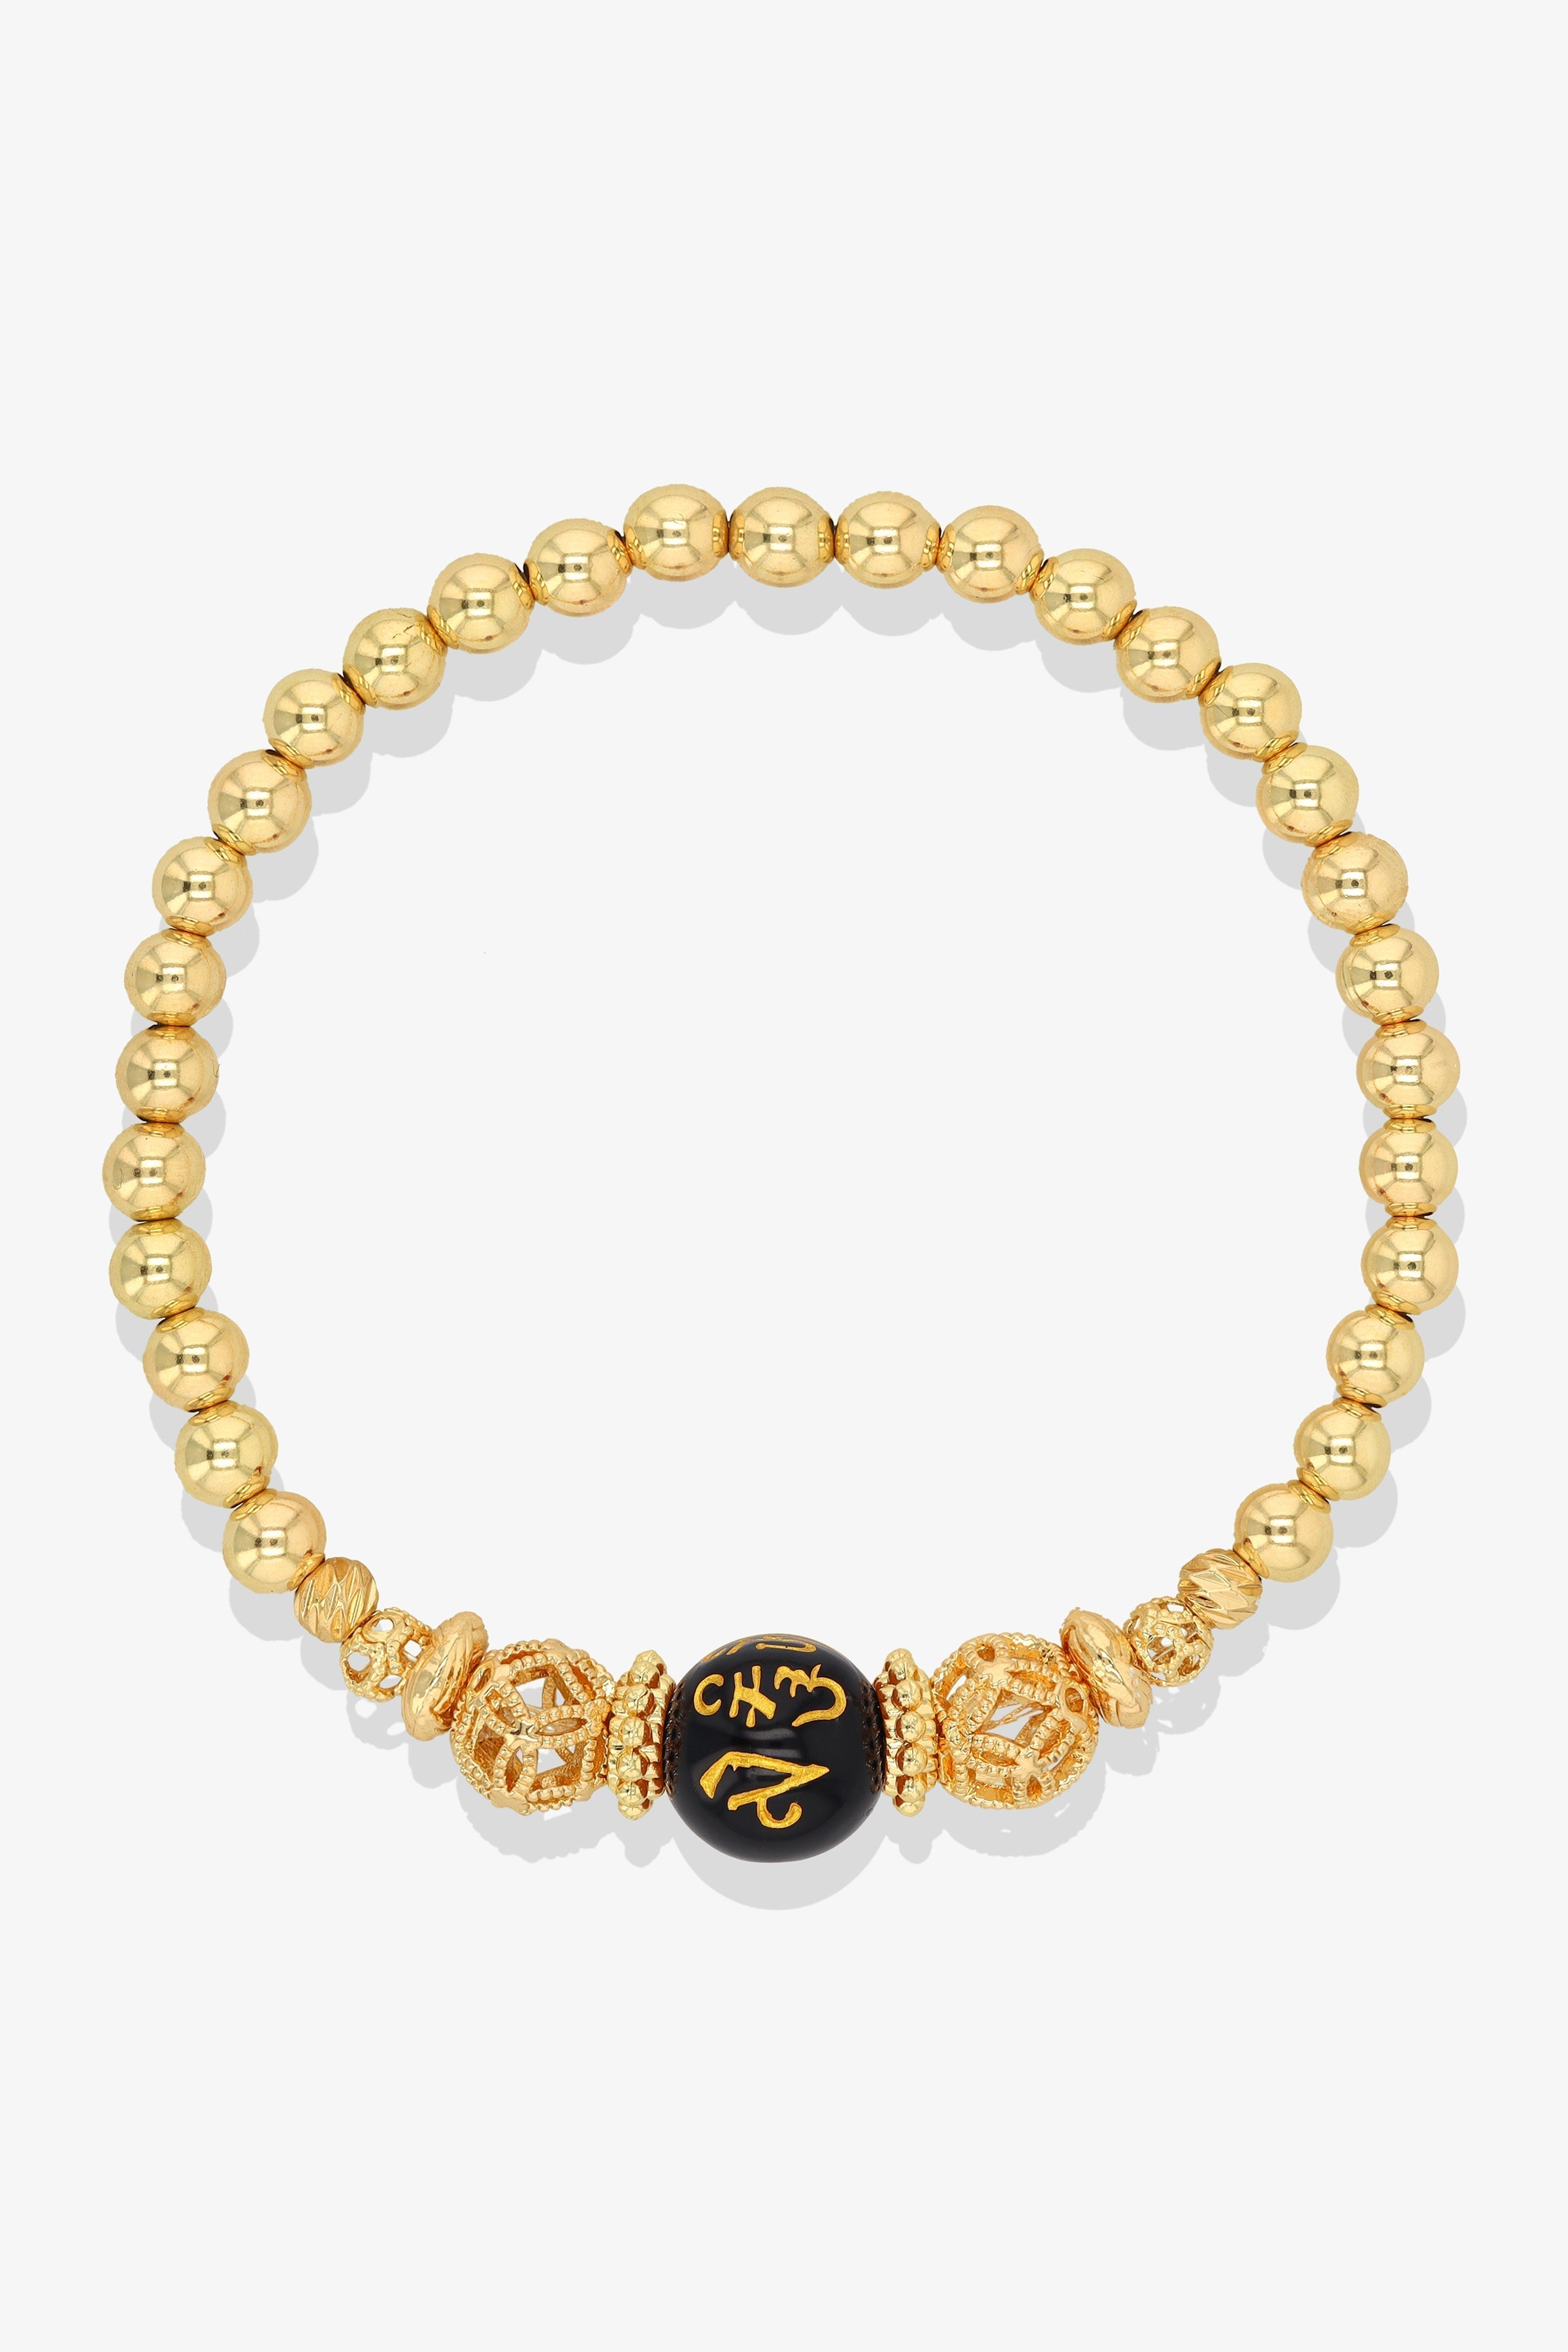 Spiritual Lucky Coin Double Happiness Bijoux with 10K Gold Beads Bracelet